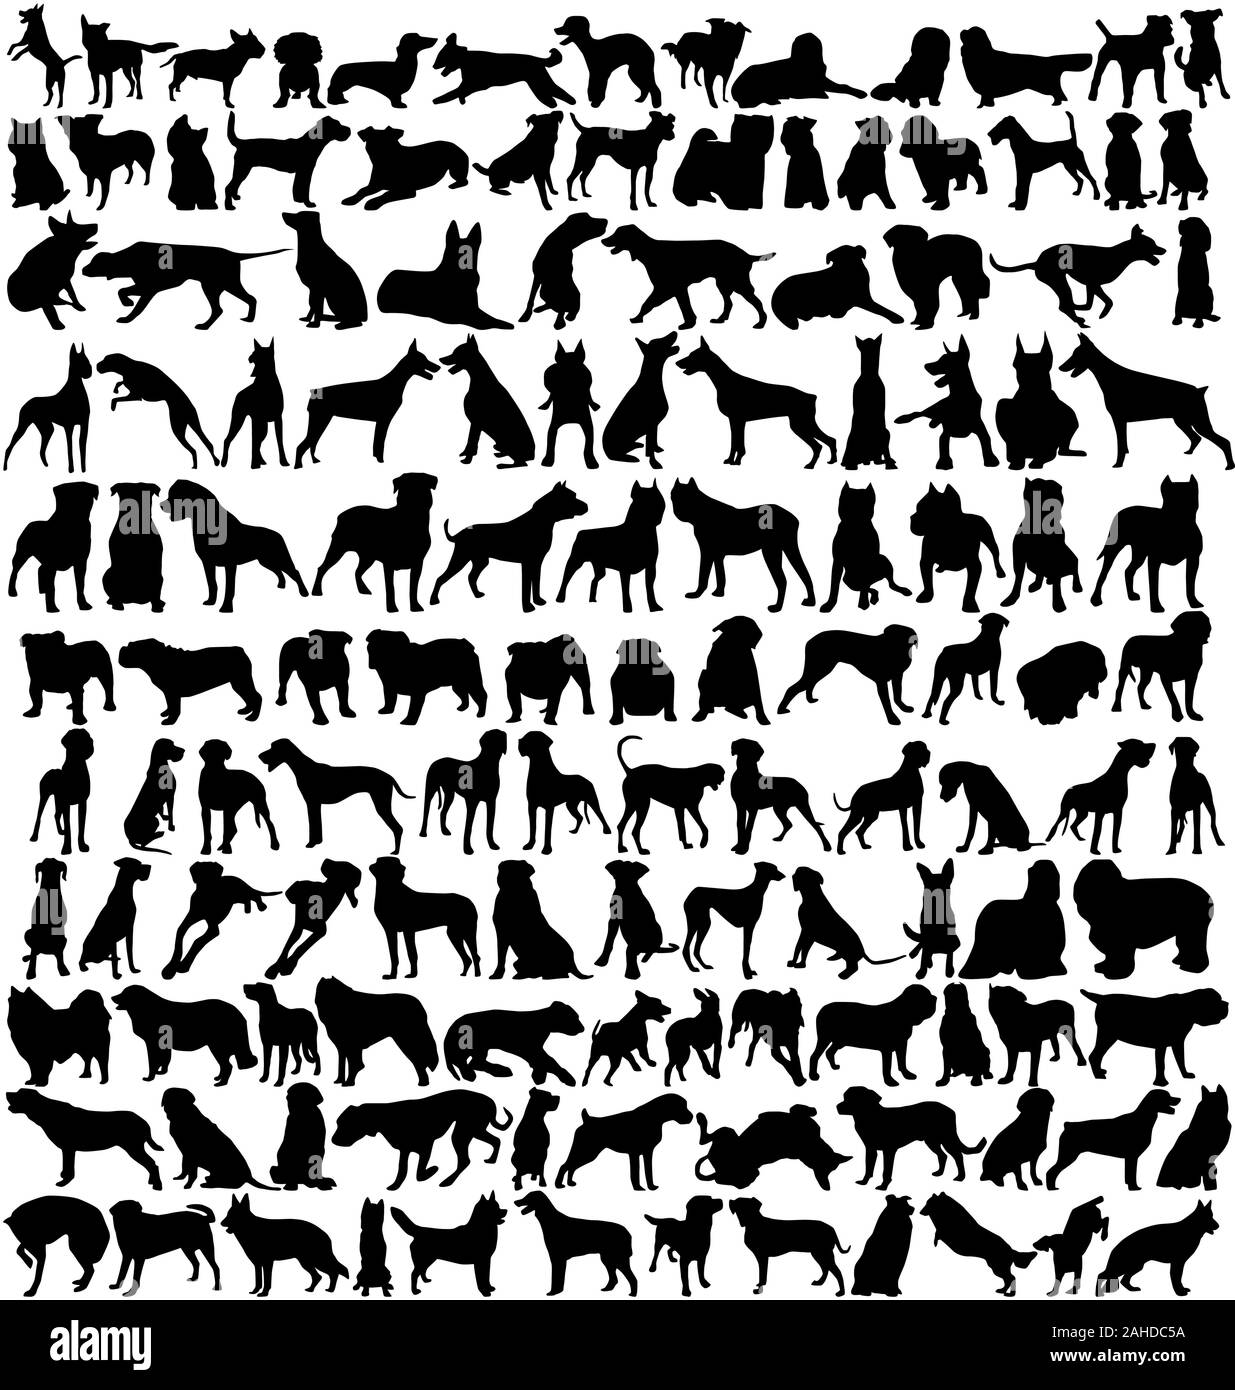 hundreds of vector dogs silhouettes Stock Vector